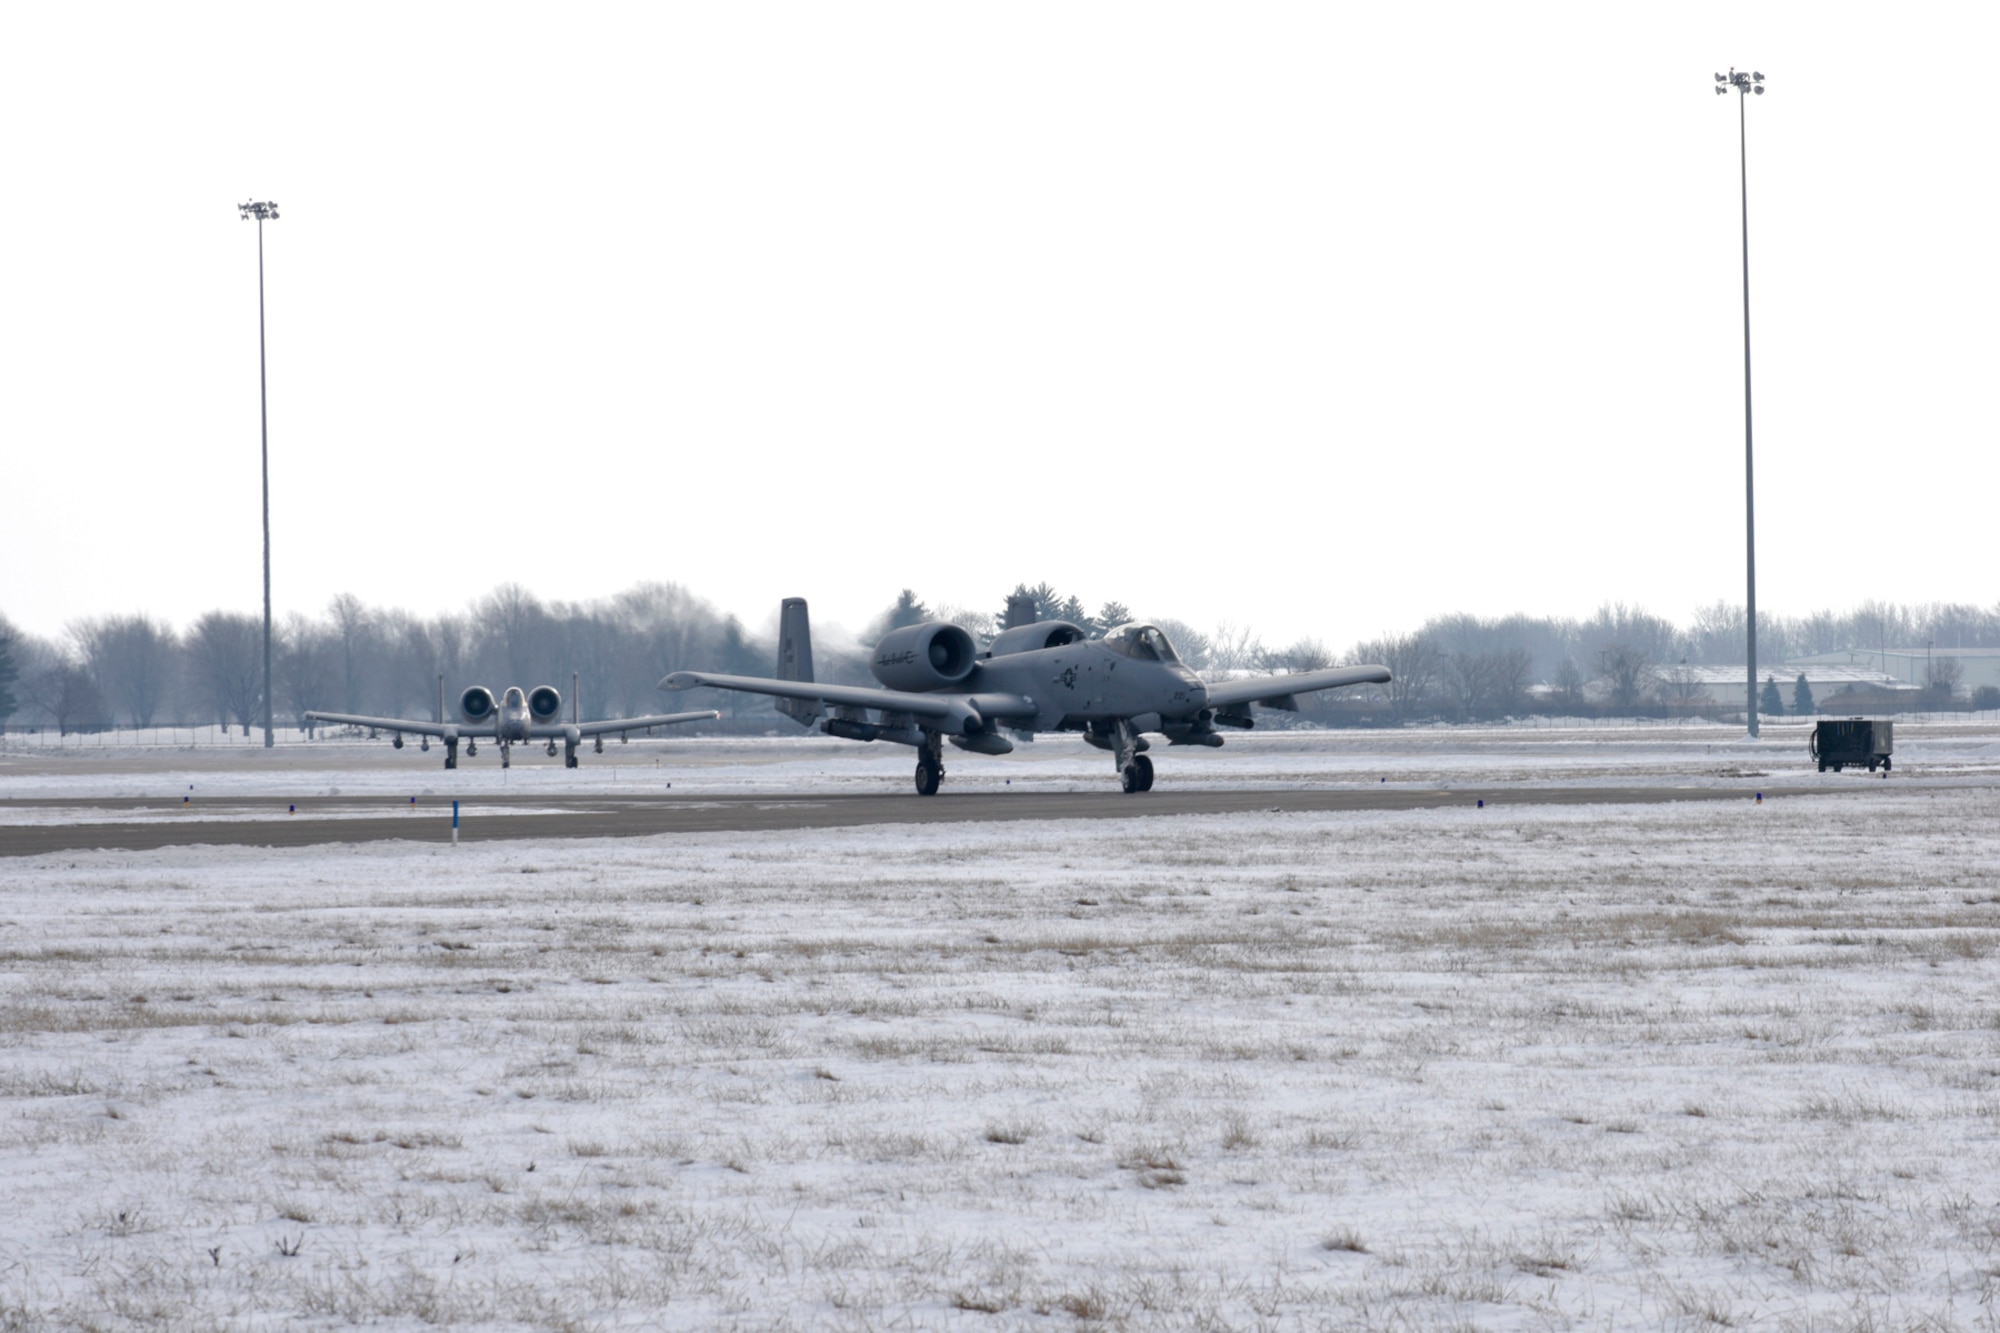 A-10 Thunderbolt II aircraft taxi as the 107th Fighter Squadron prepares to takeoff to Operation Snowbird at Davis-Monthan AFB, Ariz., on Friday, January 23.   Operation Snowbird allows military flying units to take advantage of the optimal weather conditions and live-fire ranges available in southern Arizona during the winter months, when home station training may be hampered by snow and ice. About 200 Airmen and 10 aircraft from the 127th Wing deployed and will support this year's operation.  (U.S. Air National Guard photo by Brittani Baisden)